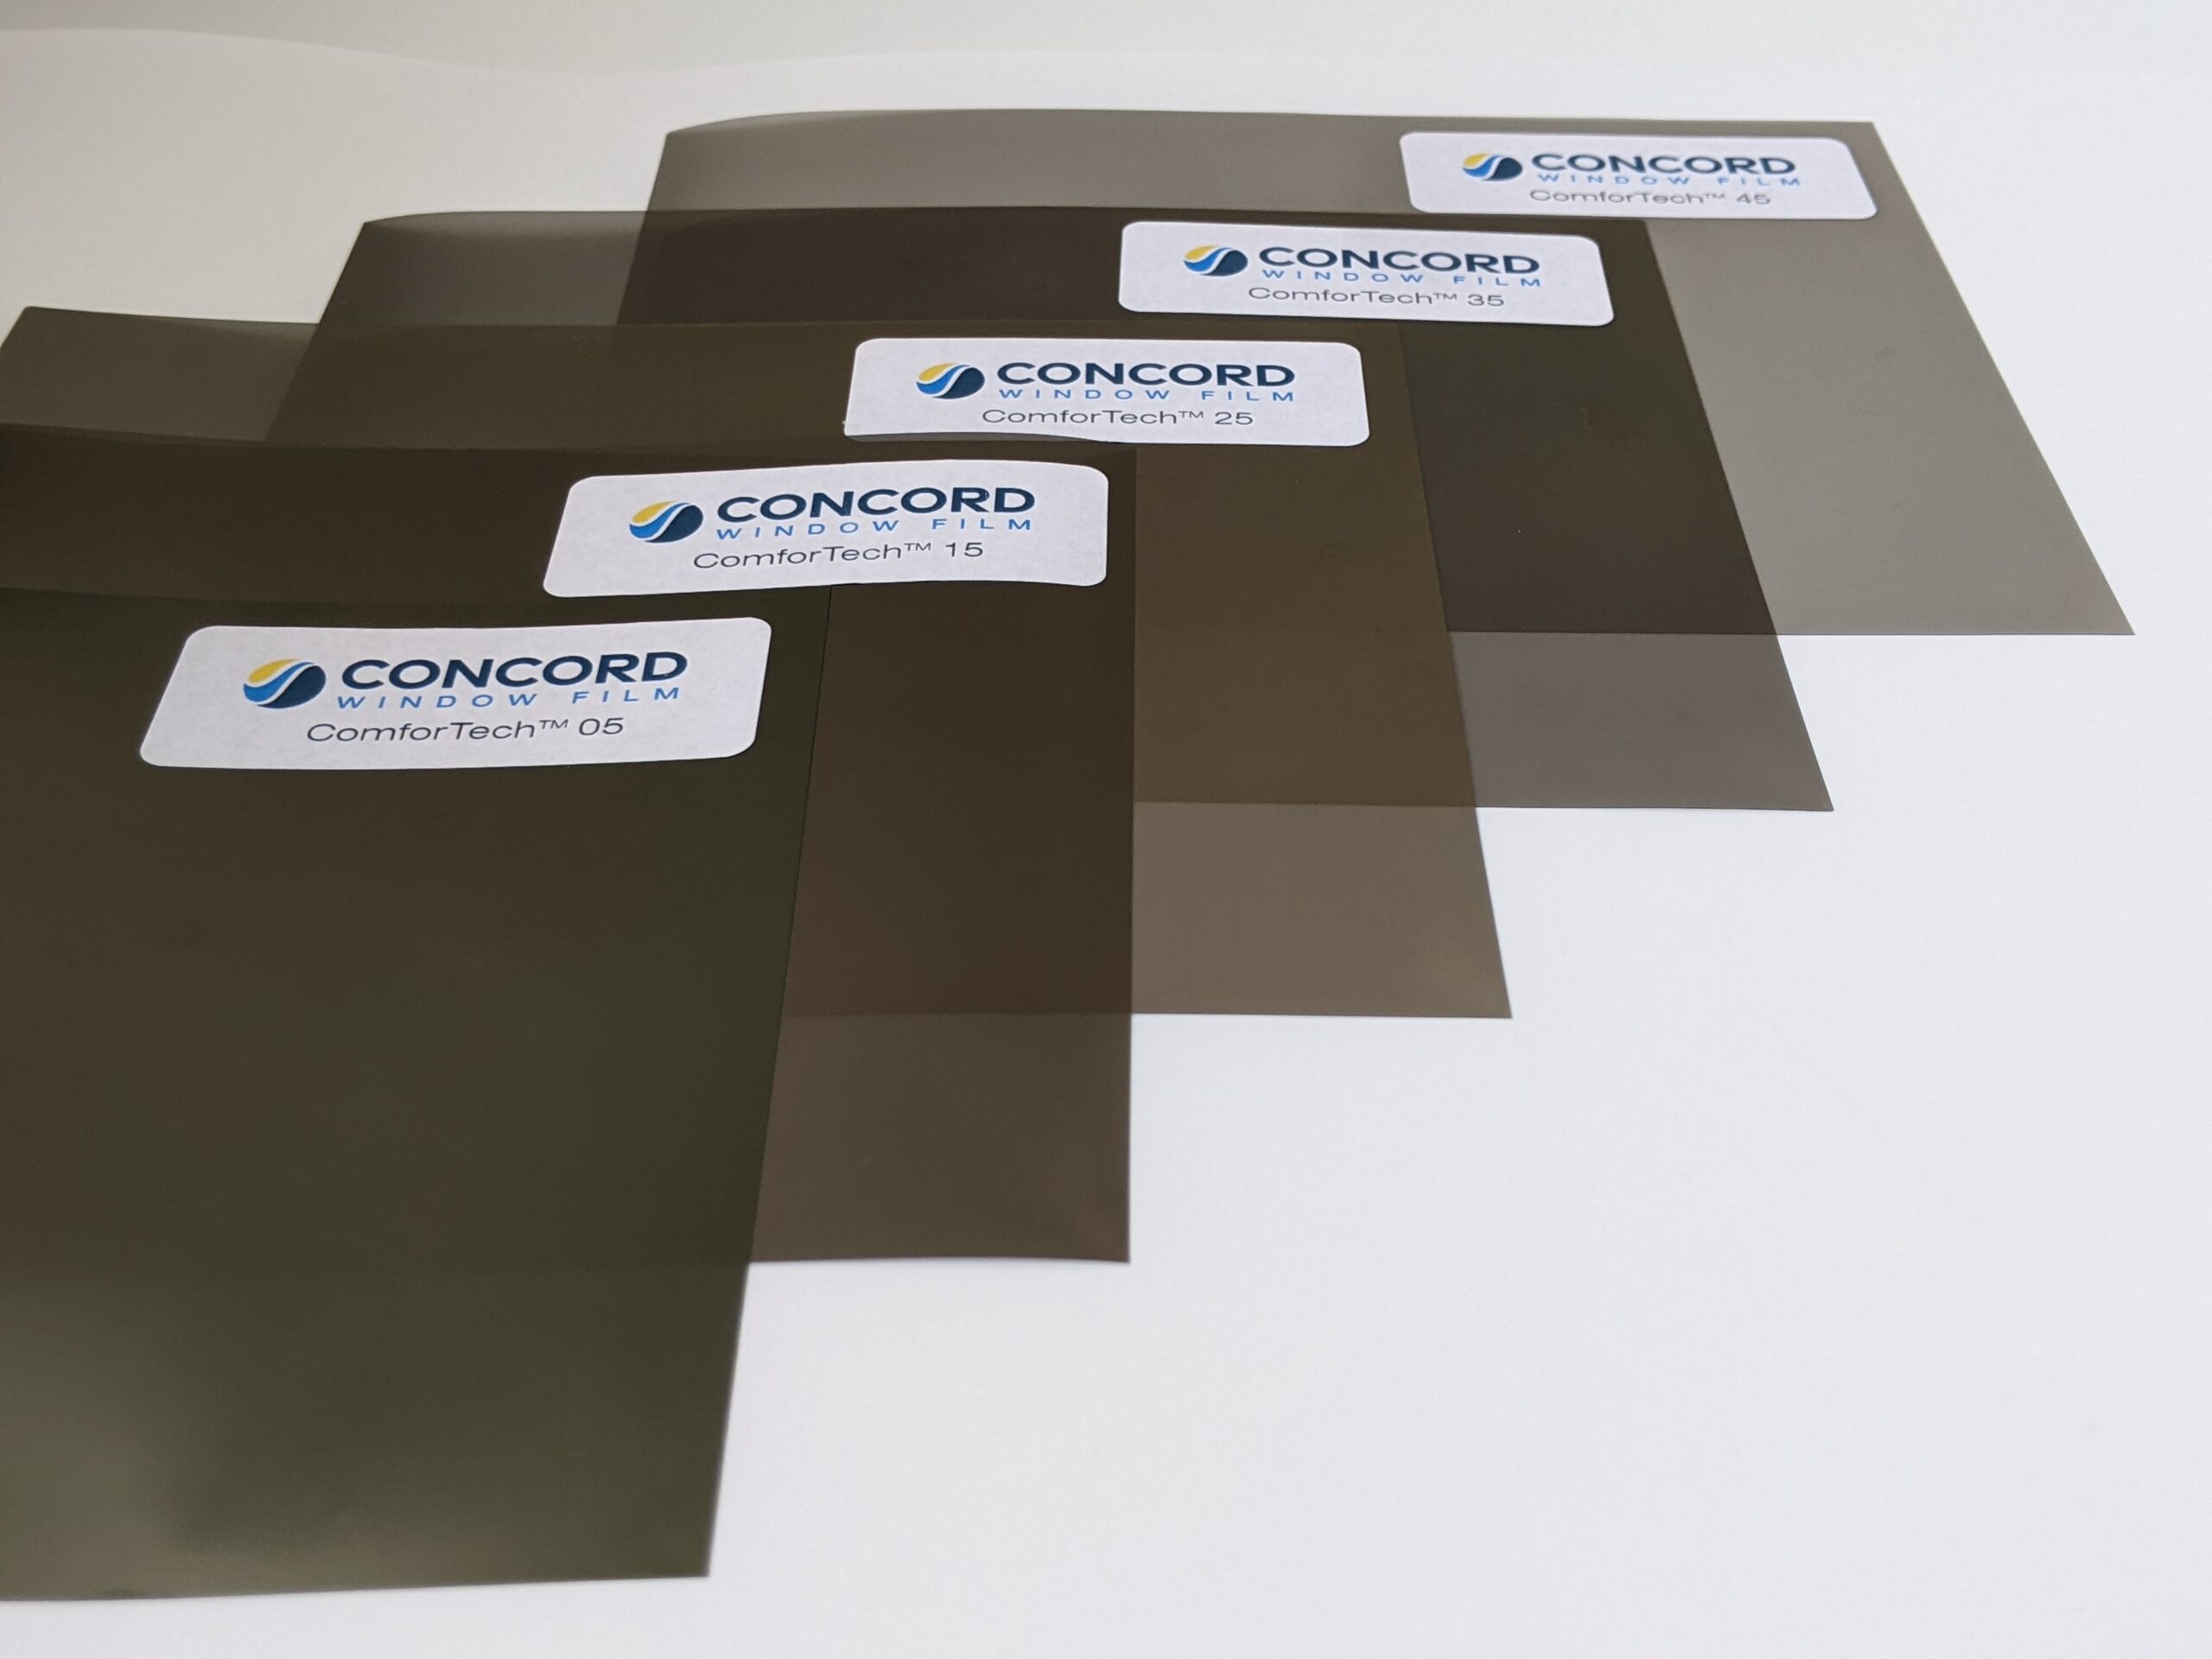 ComforTech Ceramic Series Window FIlm samples laid out from darkest to lightest to show the color or shade variation